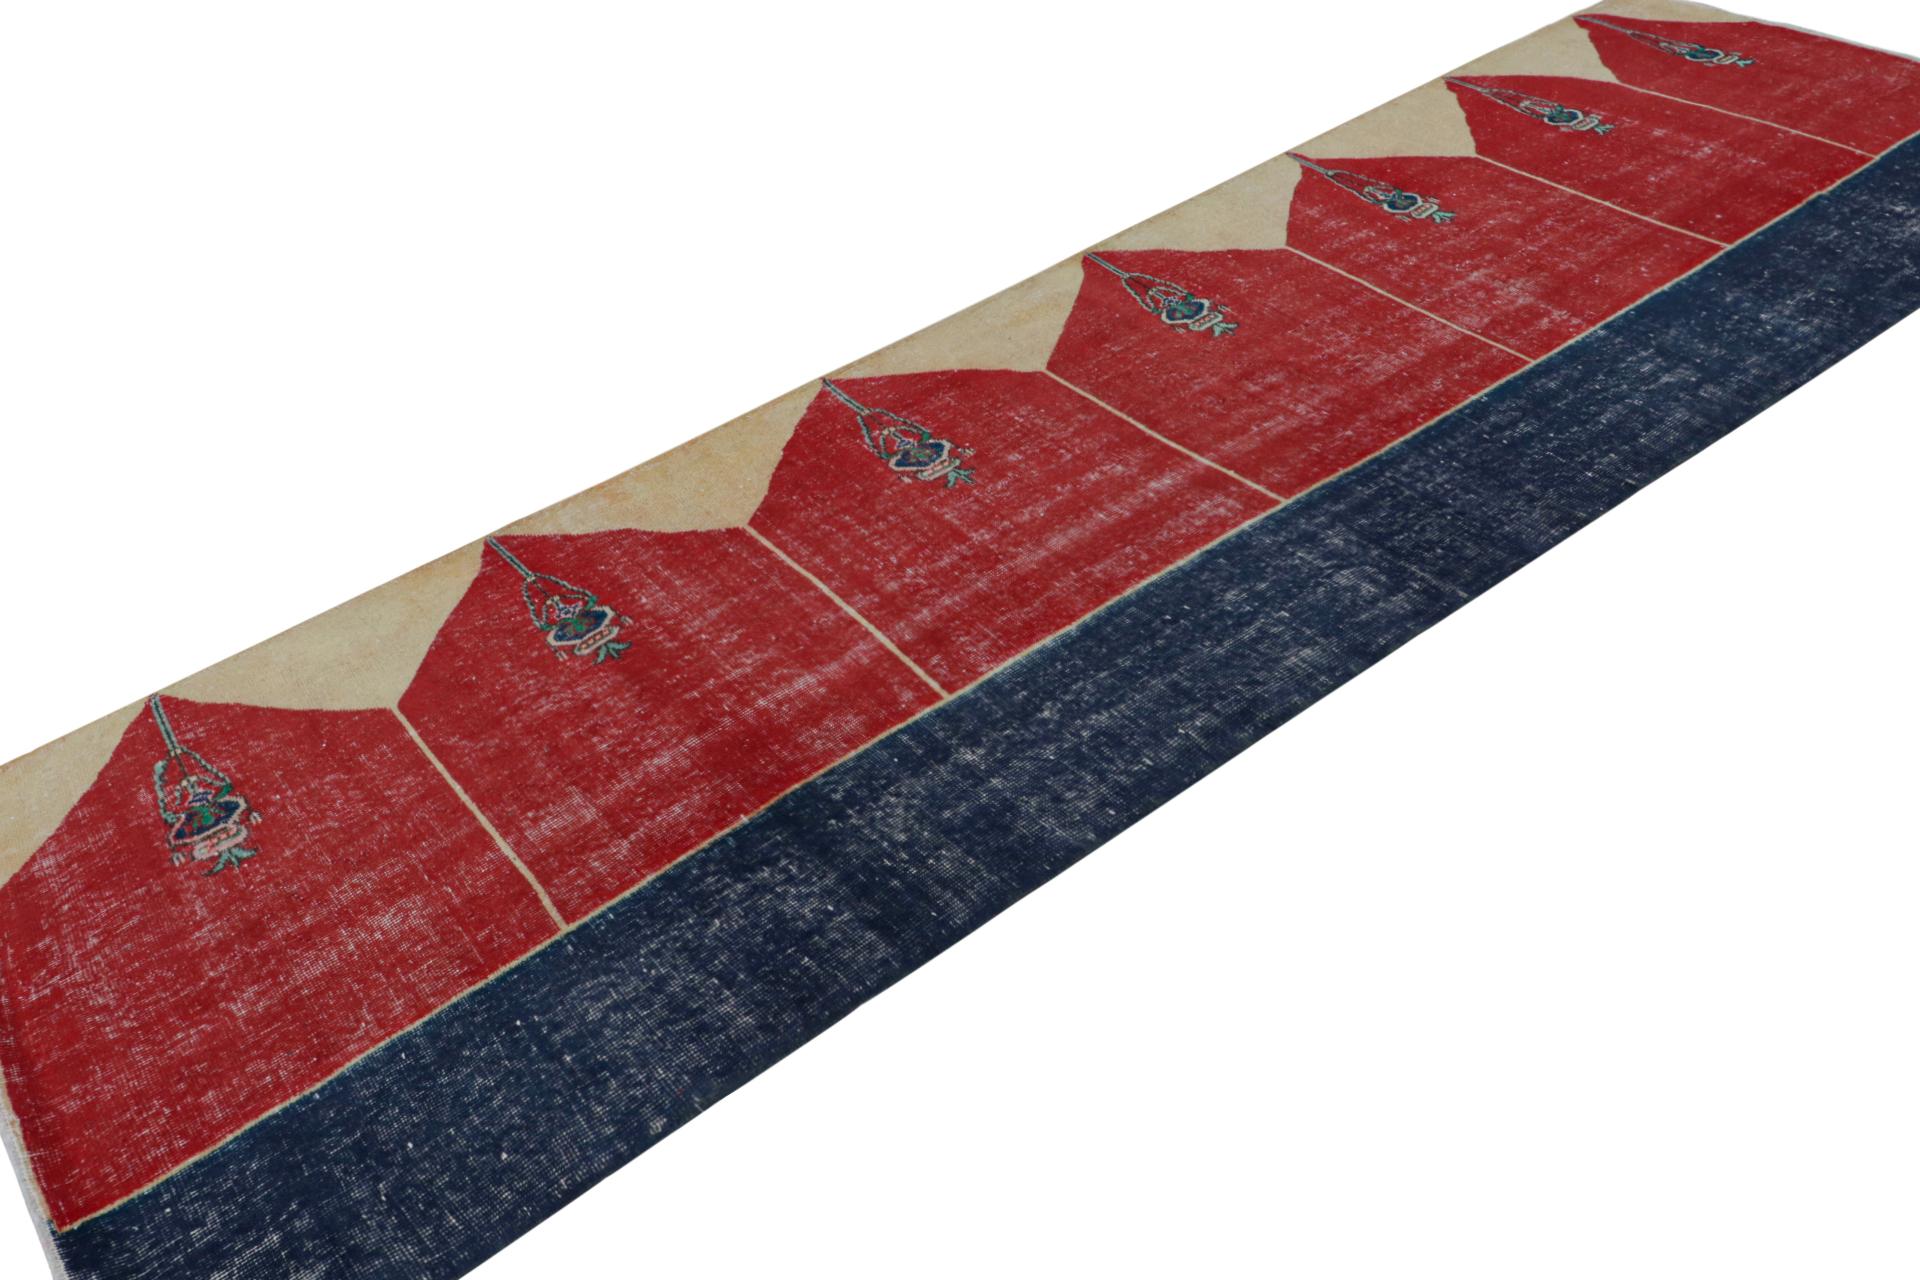 Hand knotted in wool, a vintage 4x14 Turkish runner rug circa 1950-1960 - latest to enter Rug & Kilim’s vintage selections.

On the Design:

The design is inspired by Saf rugs - a style of prayer rug known for this look. This rug draws a more